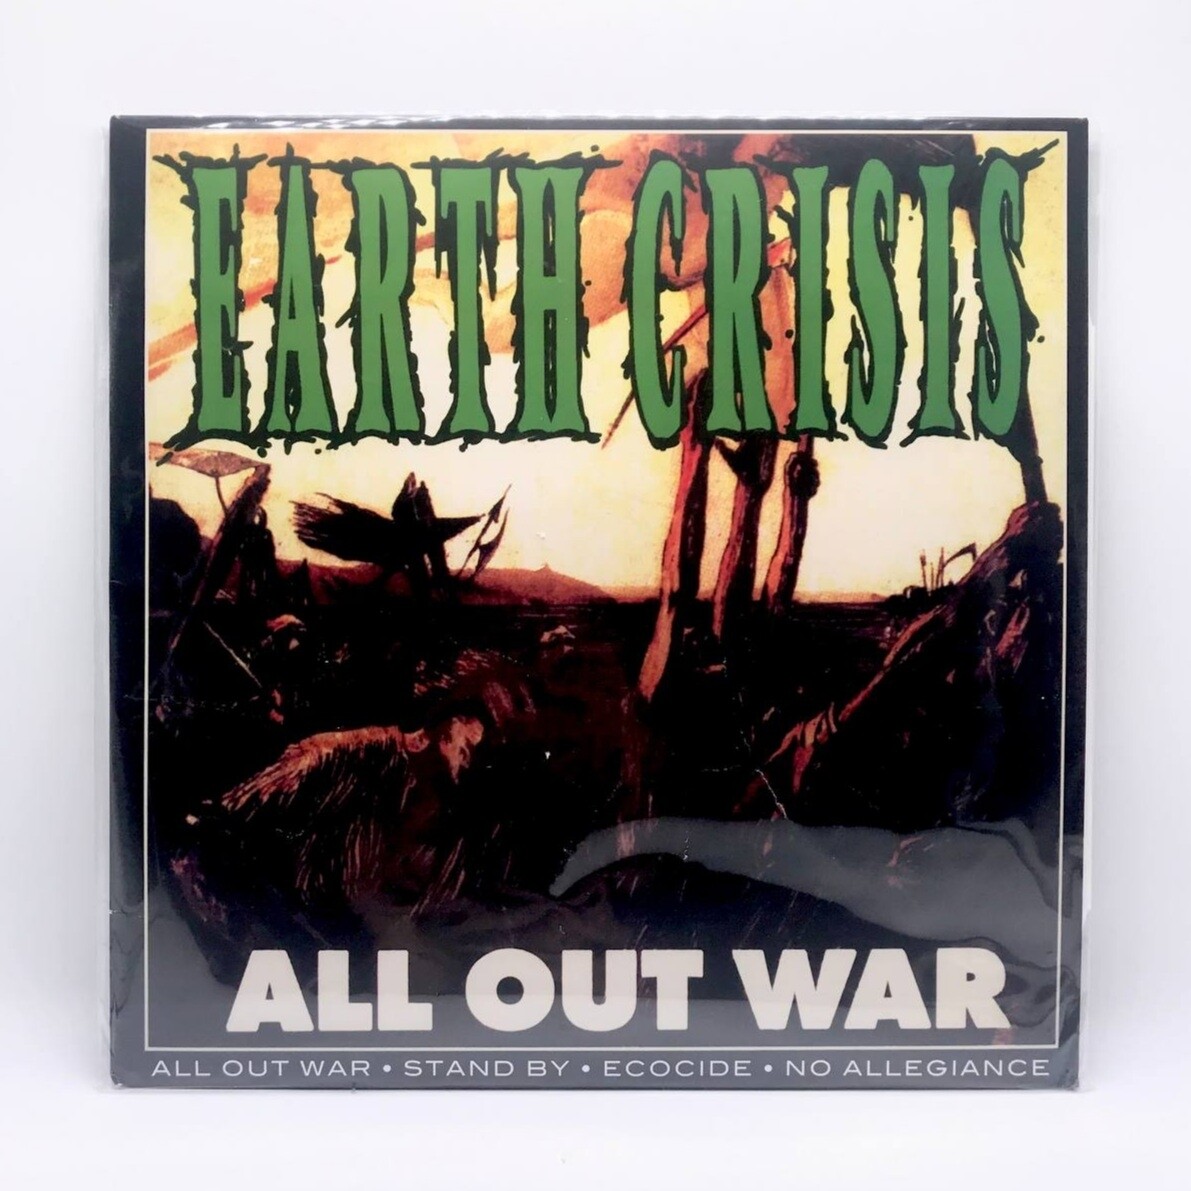 [USED] EARTH CRISIS -ALL OUT WAR & FIRESTORM: SPLIT EP- LP (RED VINYL)